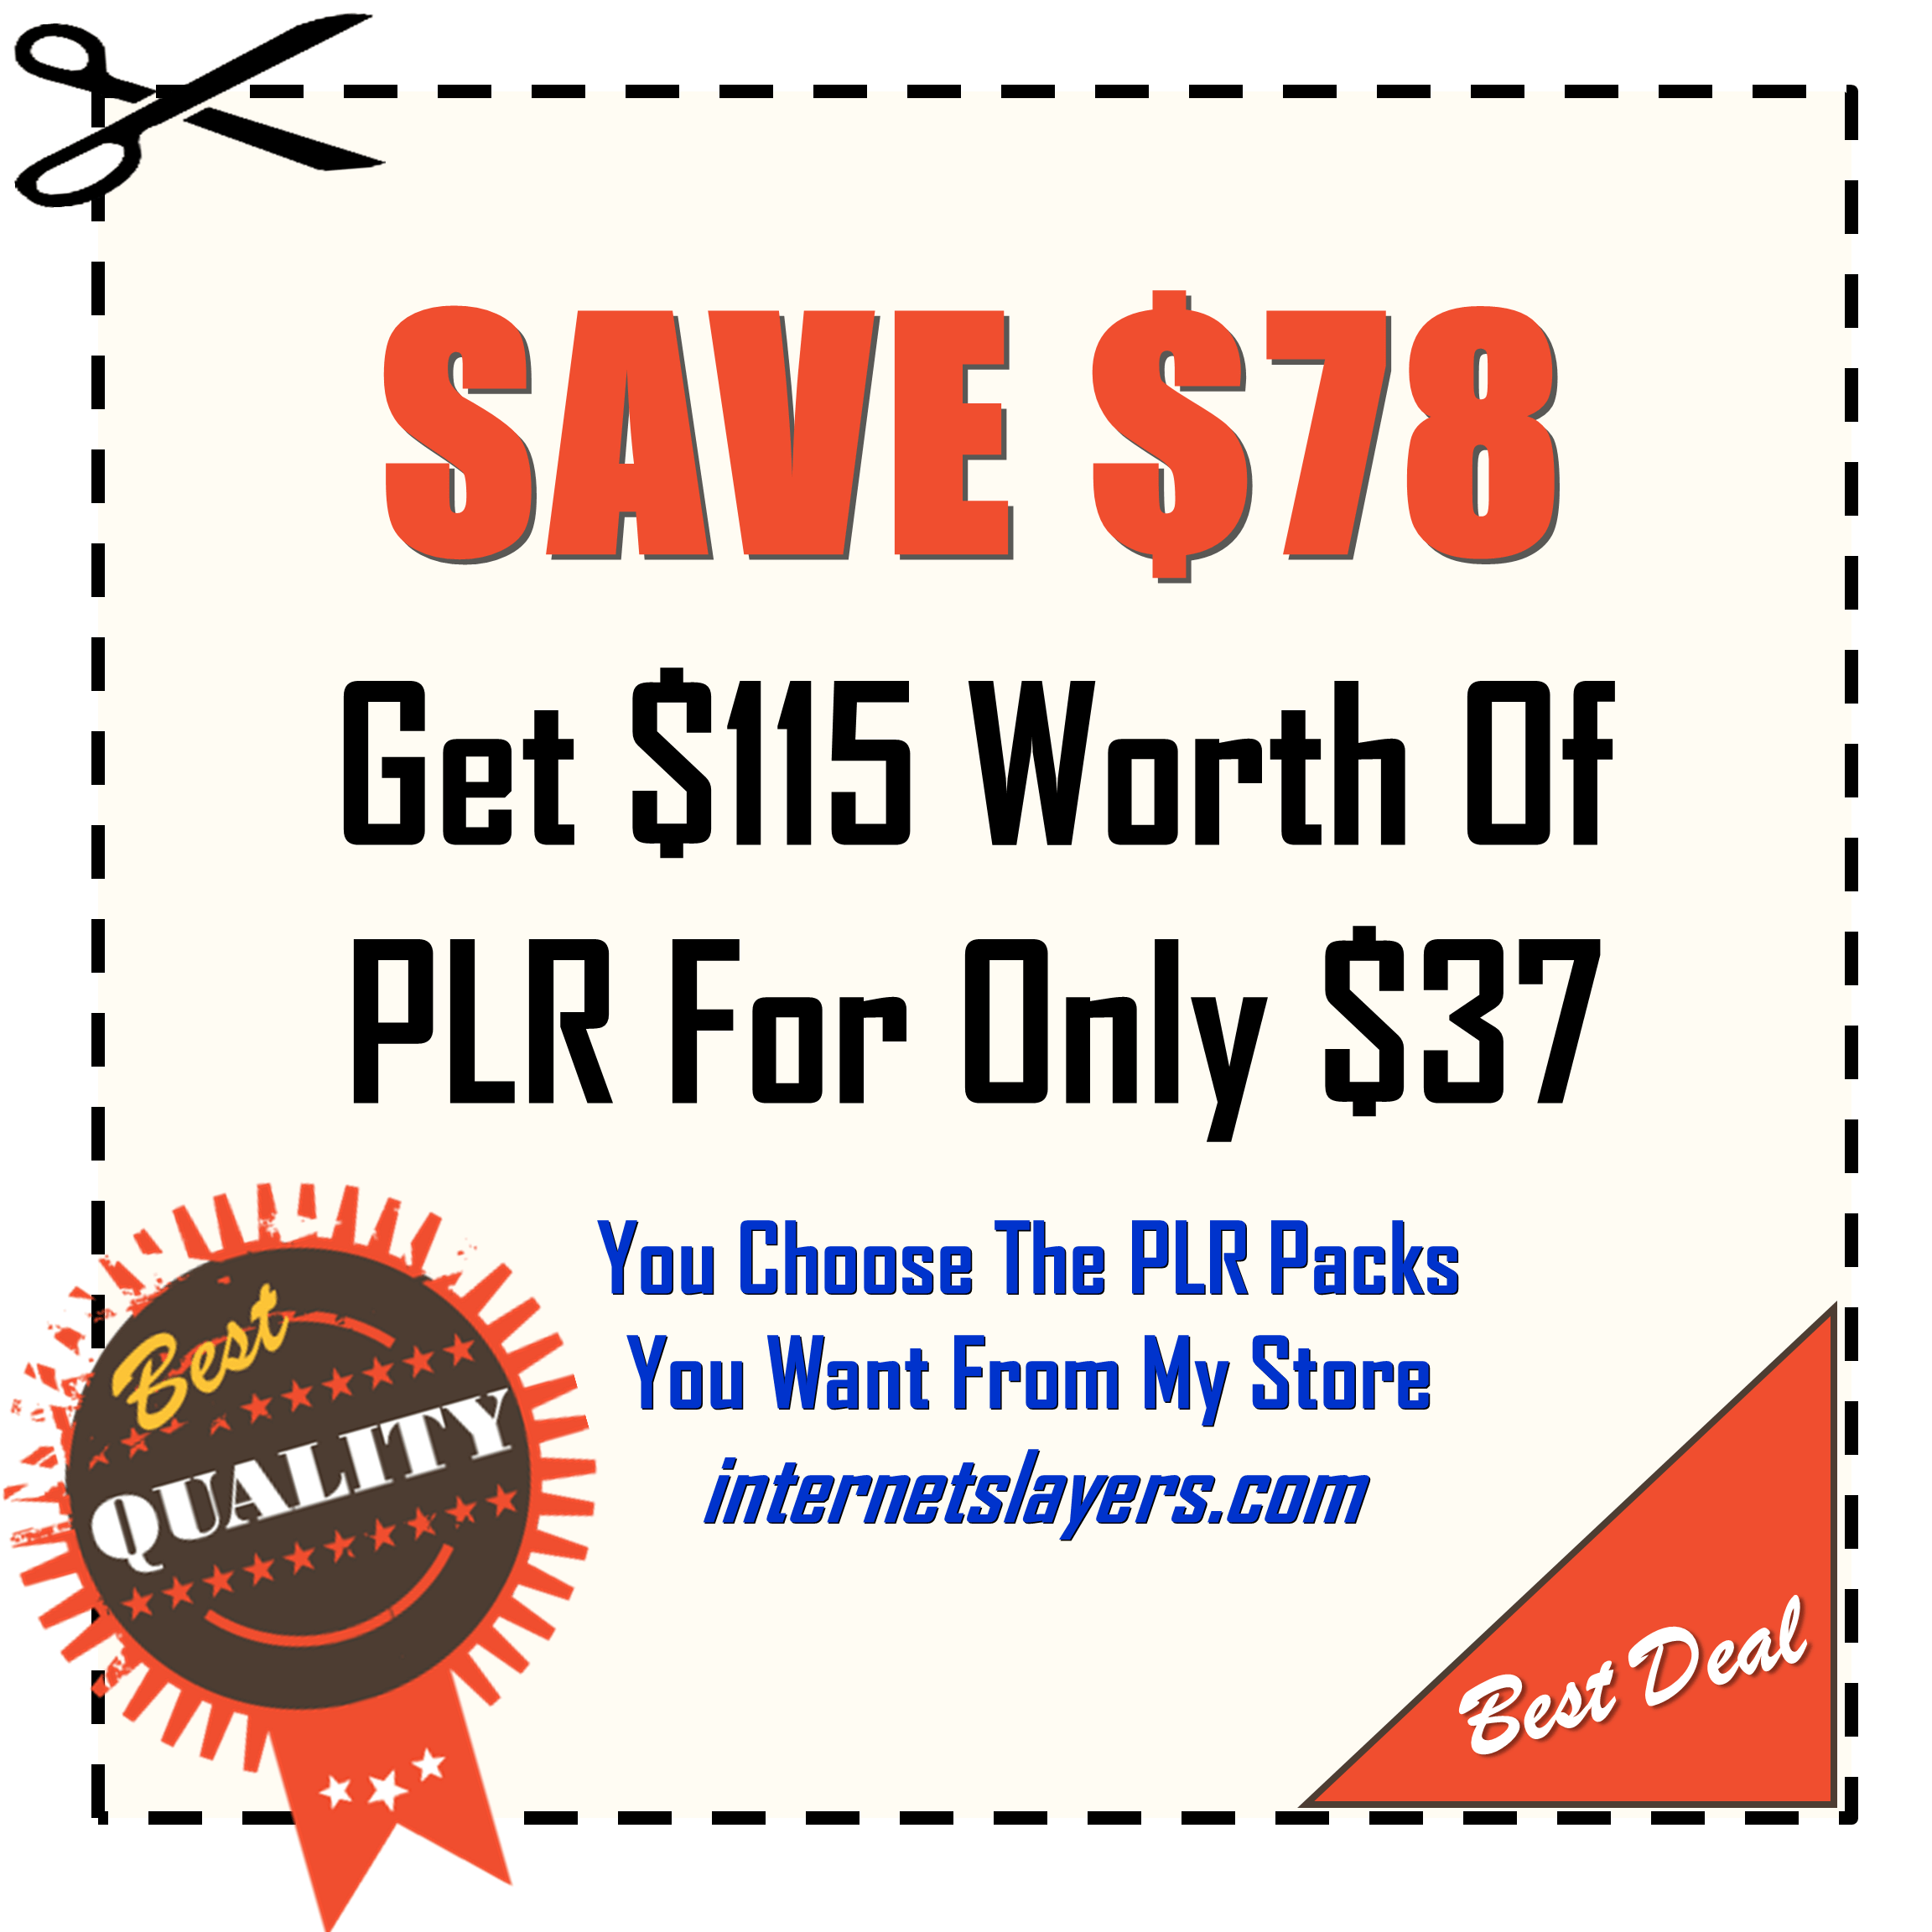 $115 Worth Of PLR For $37